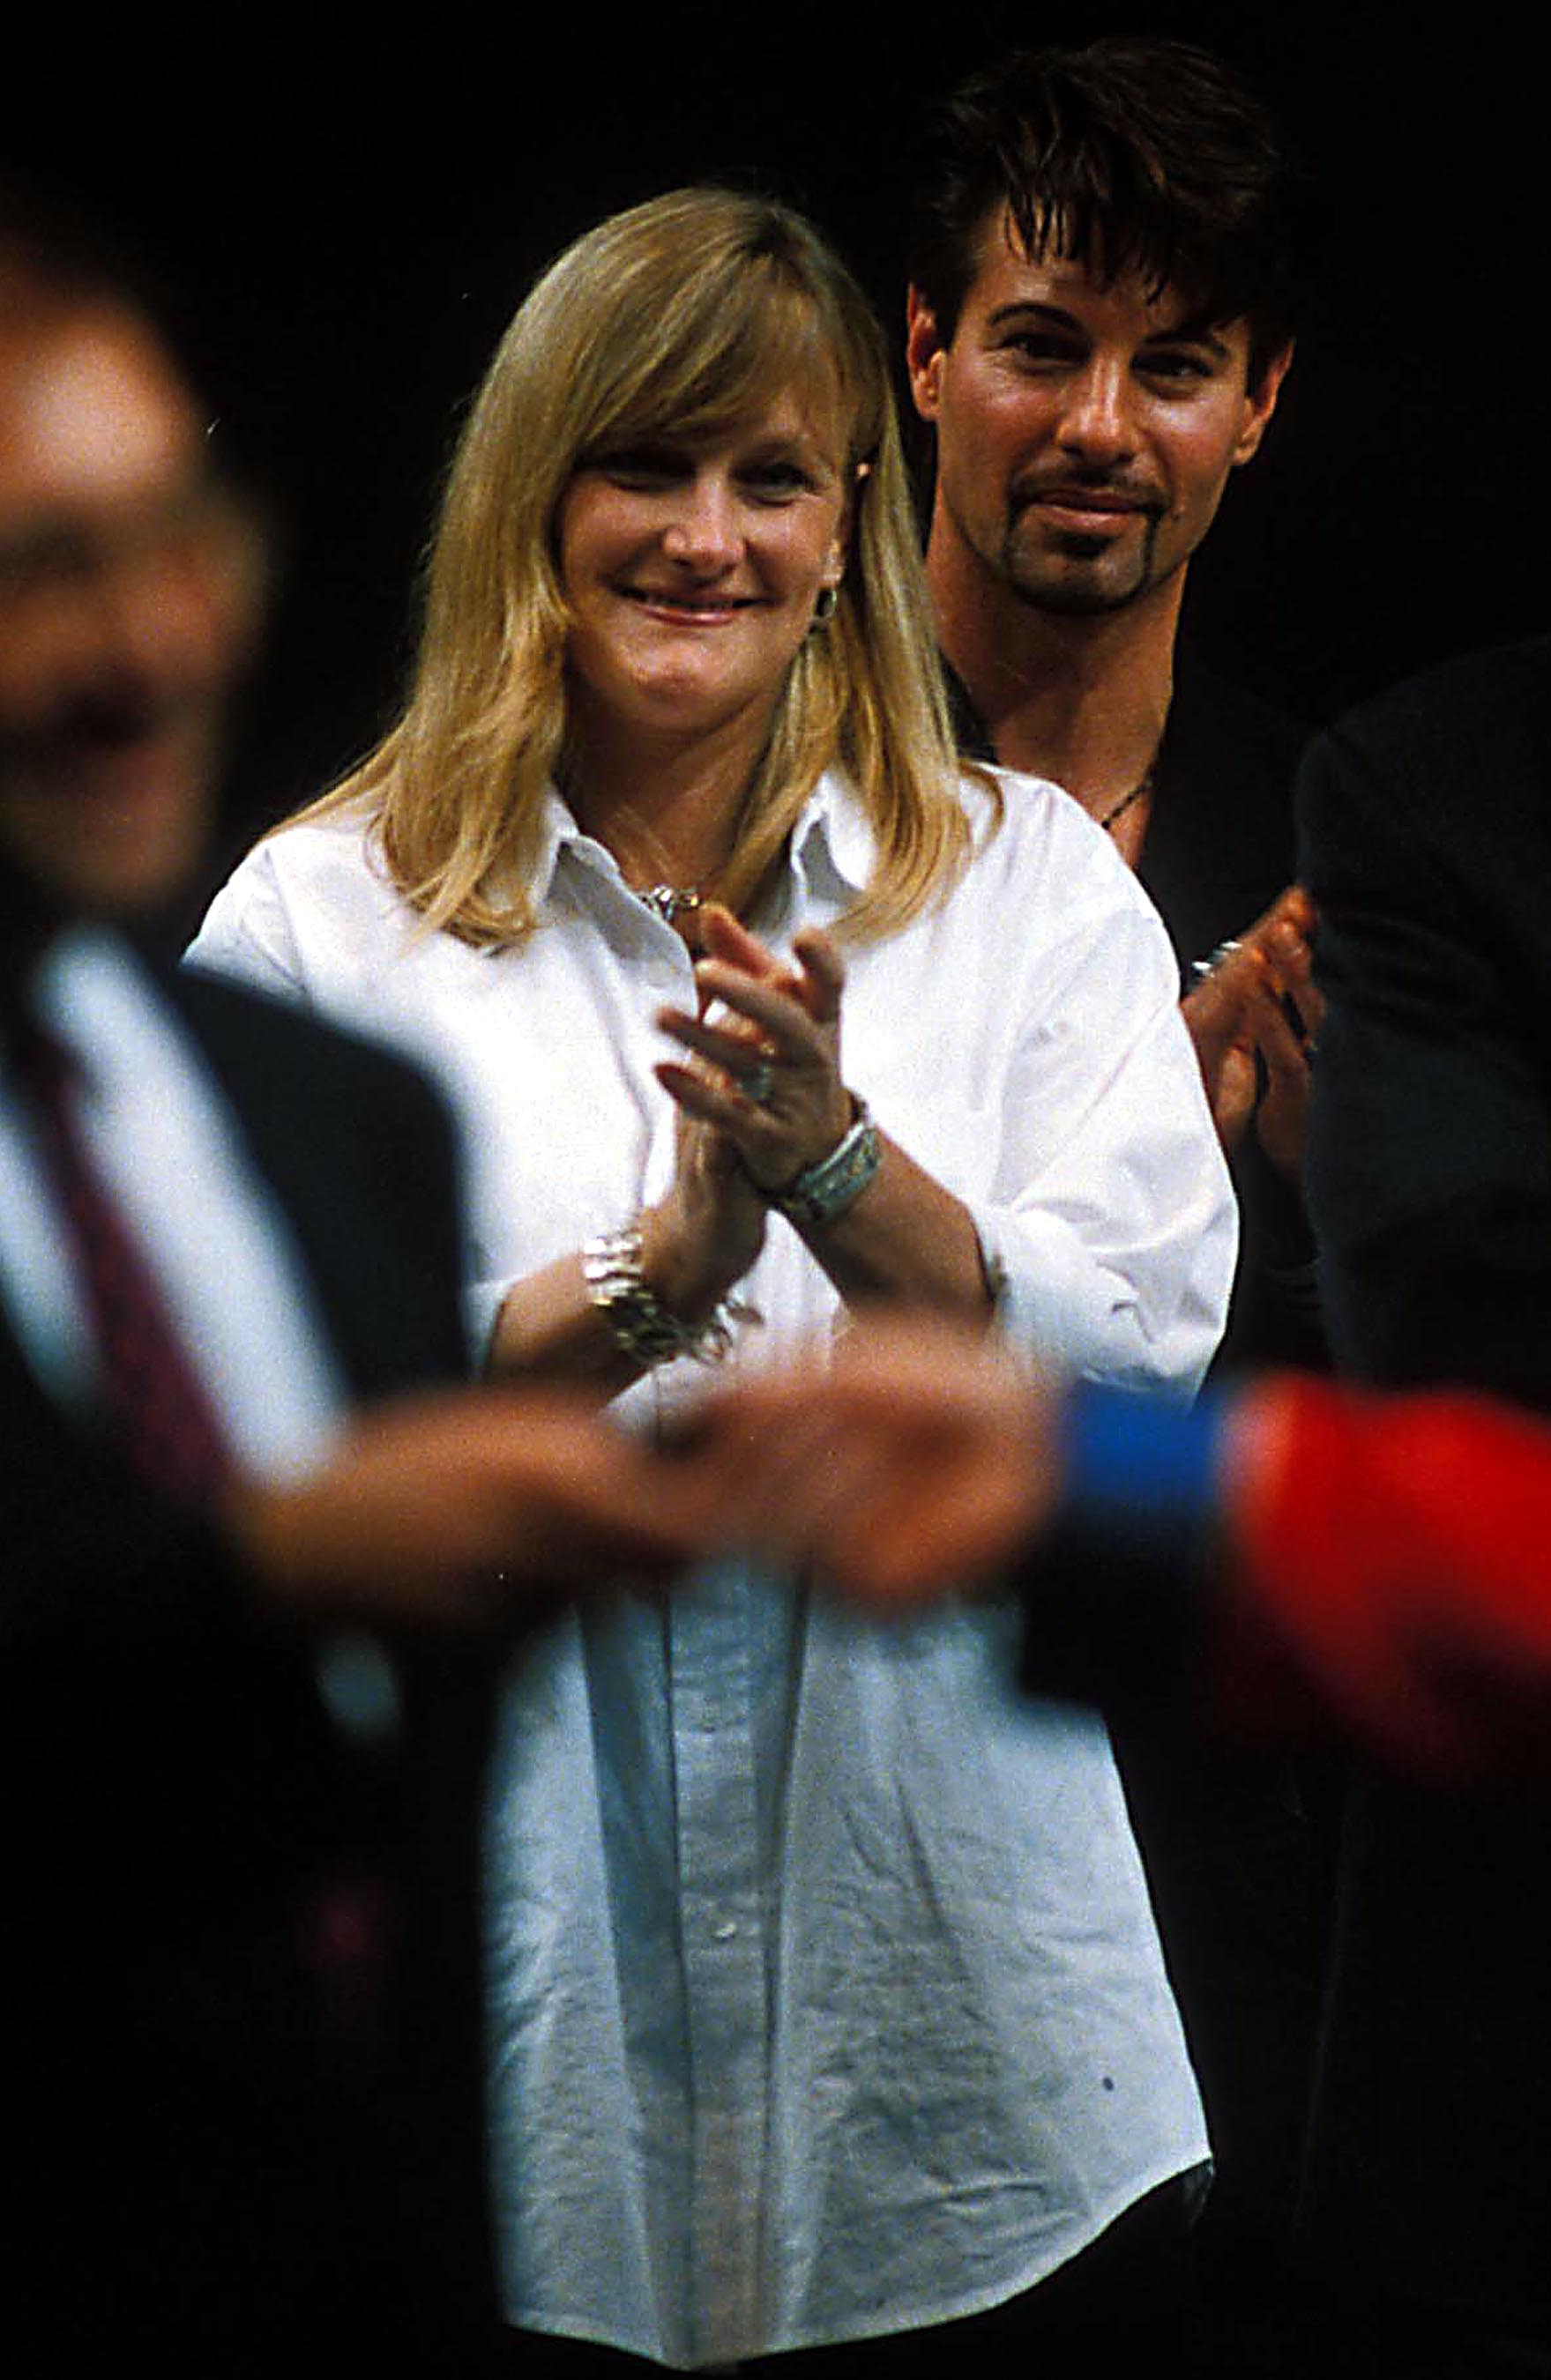 Debbie Rowe on July 1, 1997 in Sheffield, England | Source: Getty Images